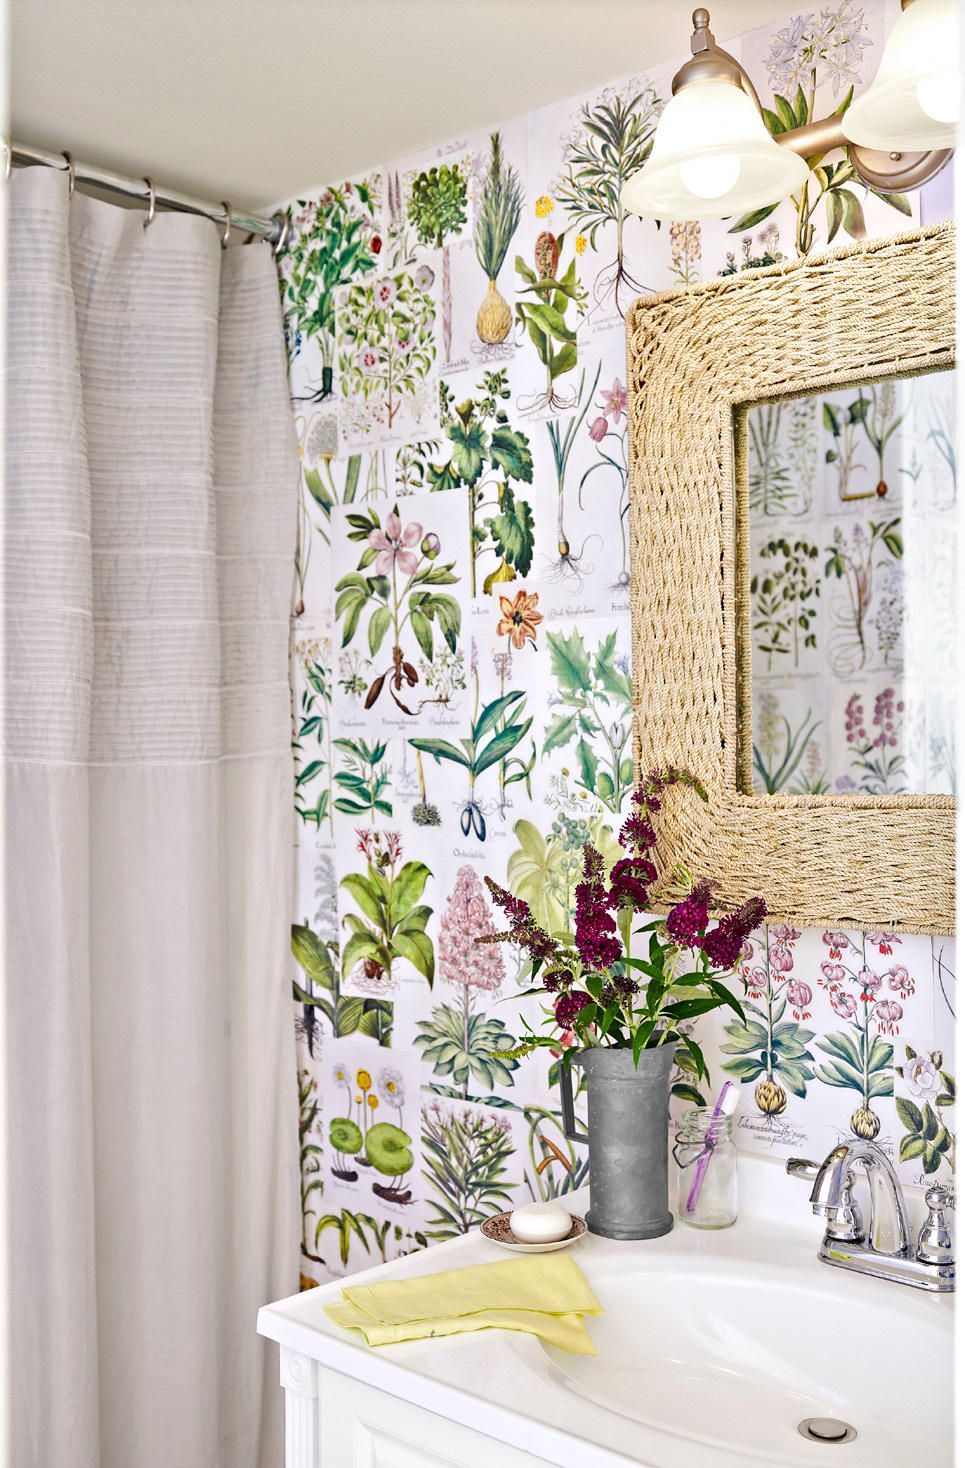 55 Bathroom Decorating Ideas Pictures, Bathroom Decor With Shower Curtains